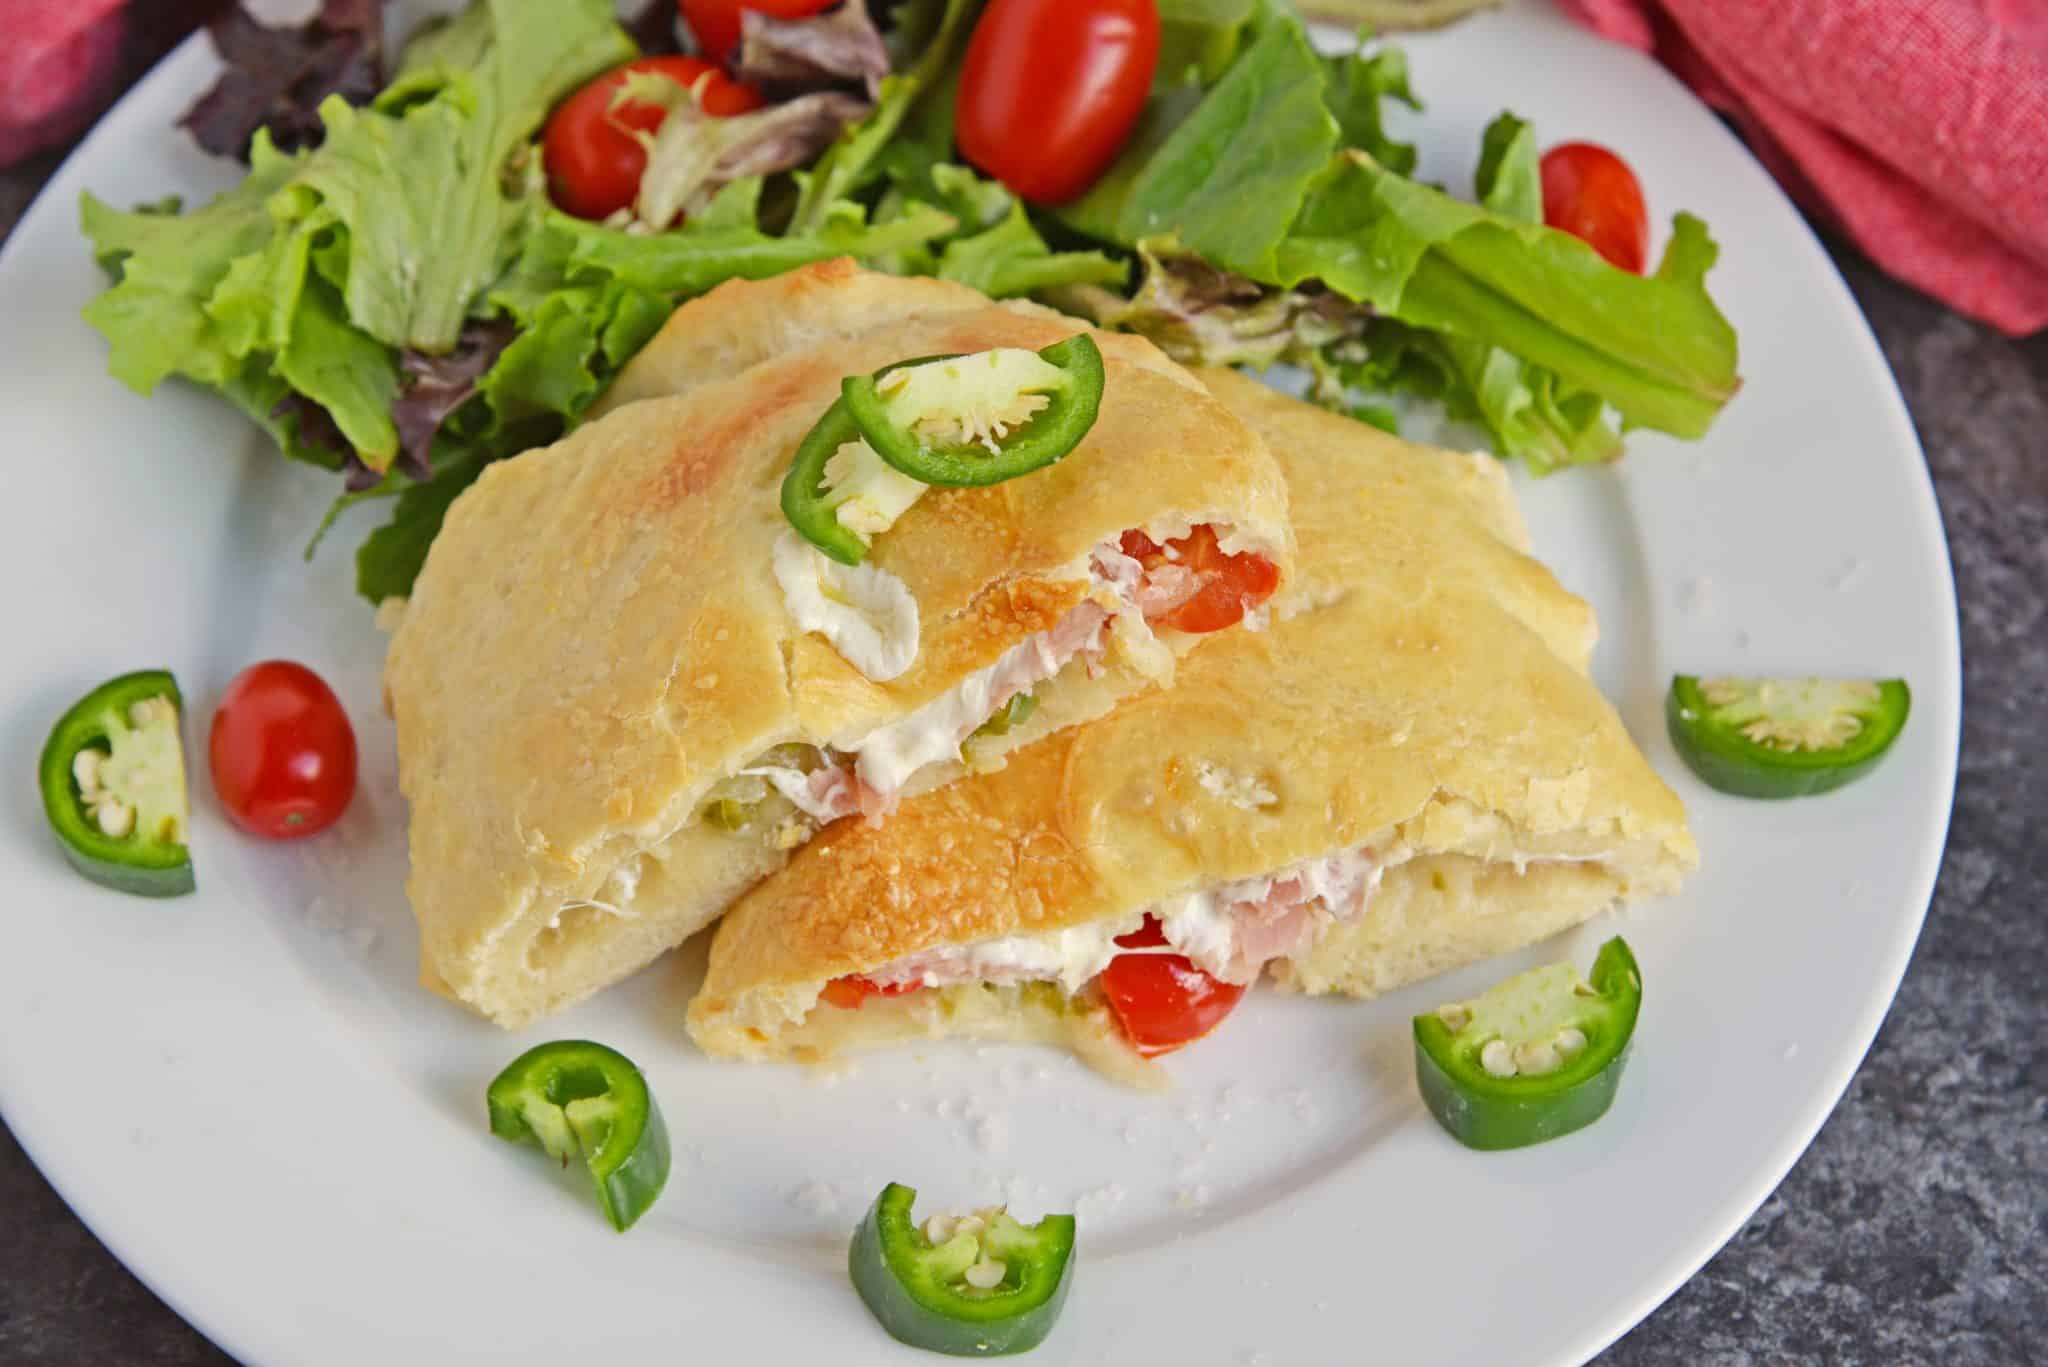 Spicy Hawaiian Calzones have become a favorite lately in this household! This is a easy calzone recipe just like your favorite Hawaiian Pizza with ham, pineapple and jalapenos! #hawaiianpizza #hawaiianfood www.savoryexperiments.com